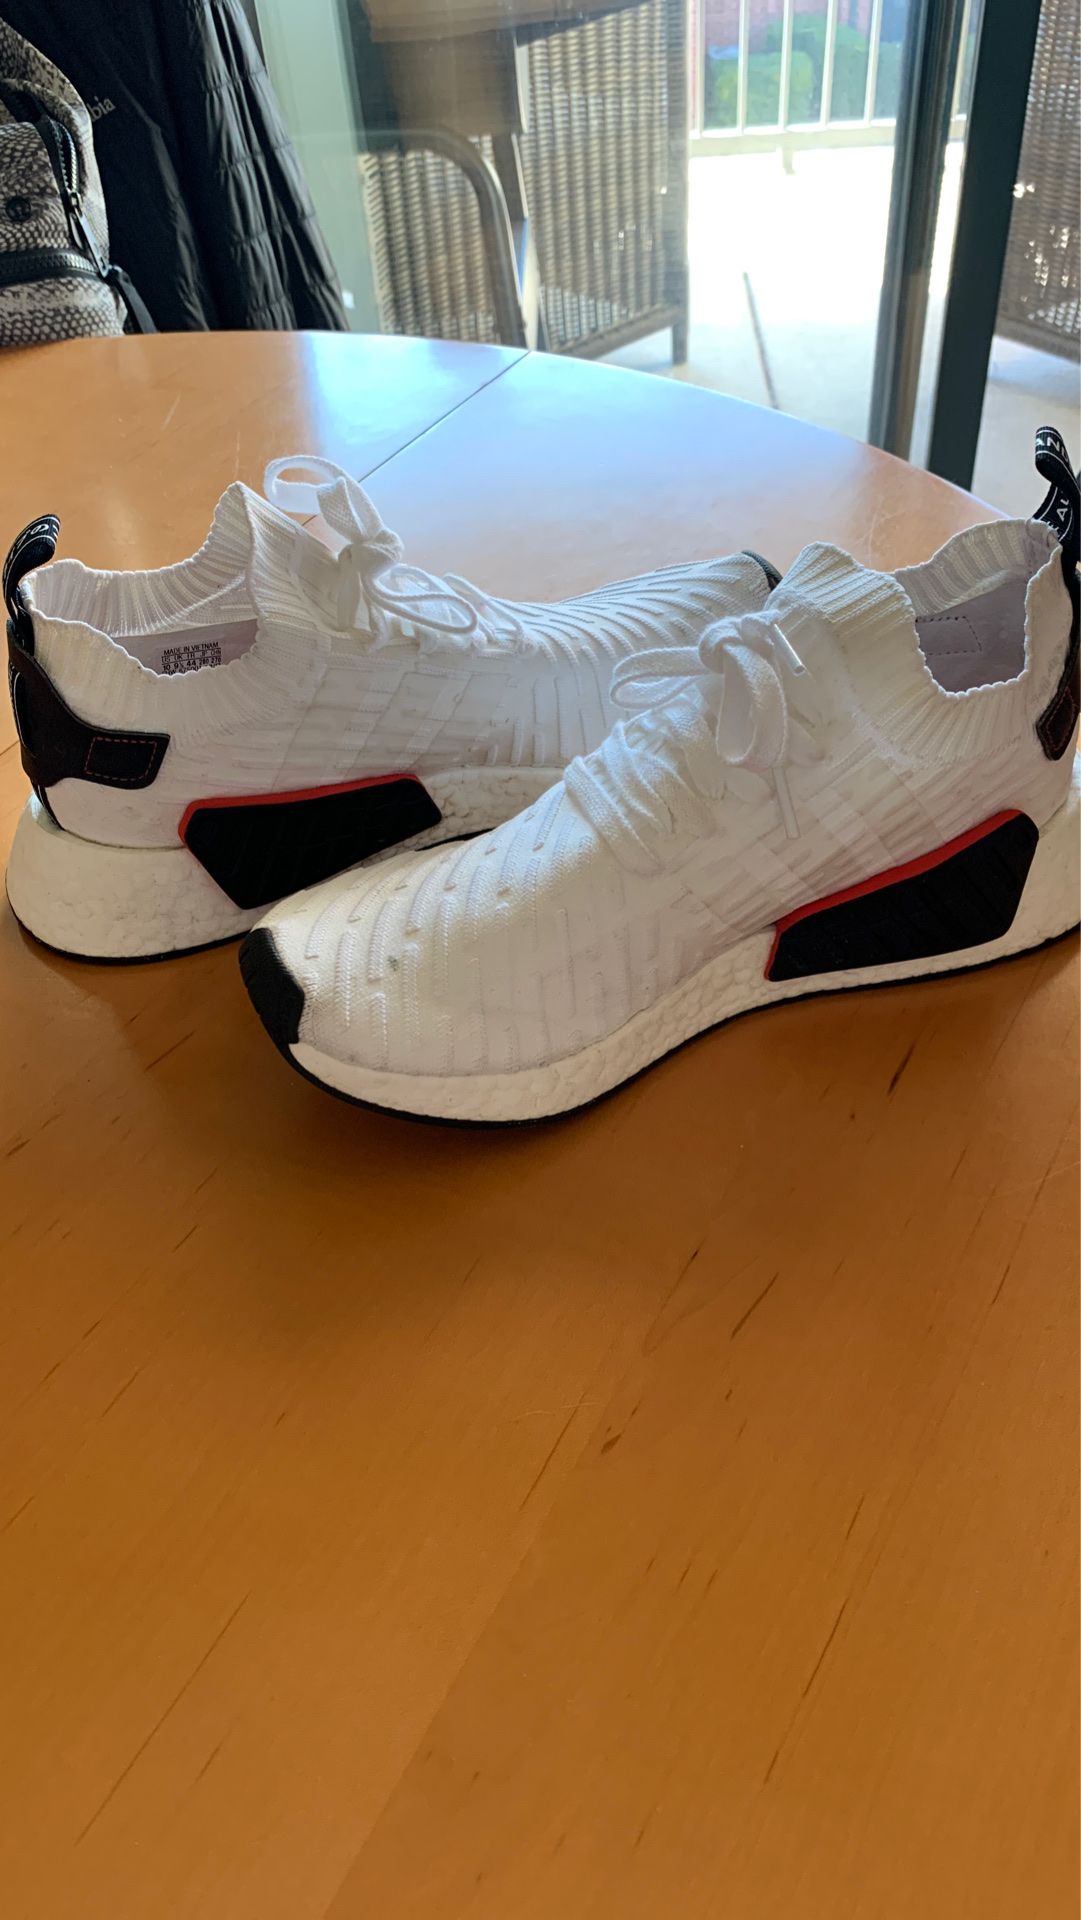 Adidas NMD White with Red/Black accents, Men’s Size 10